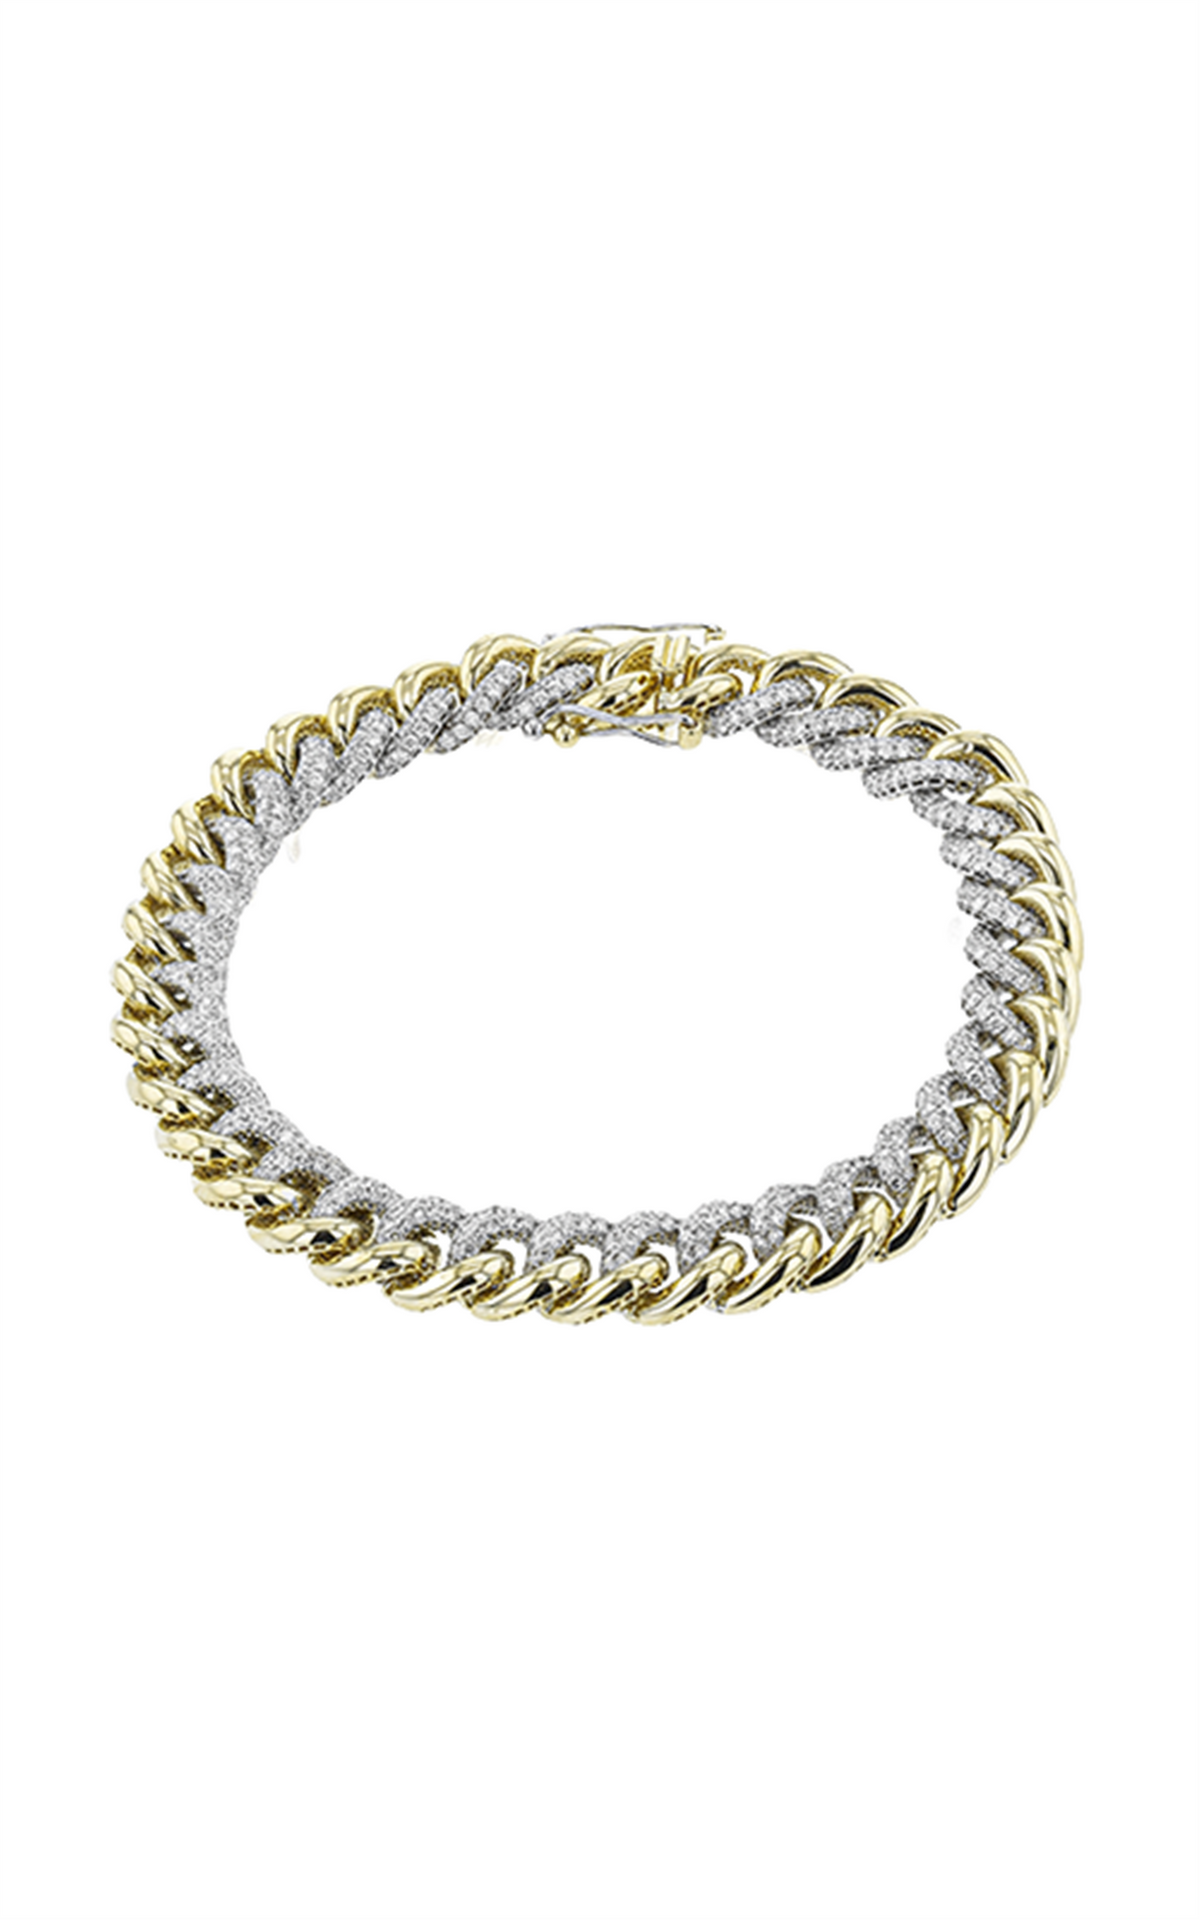 Simon G. 18Kt Yellow & White Gold Curb Link Bracelet With 2.87cttw Natural Diamonds